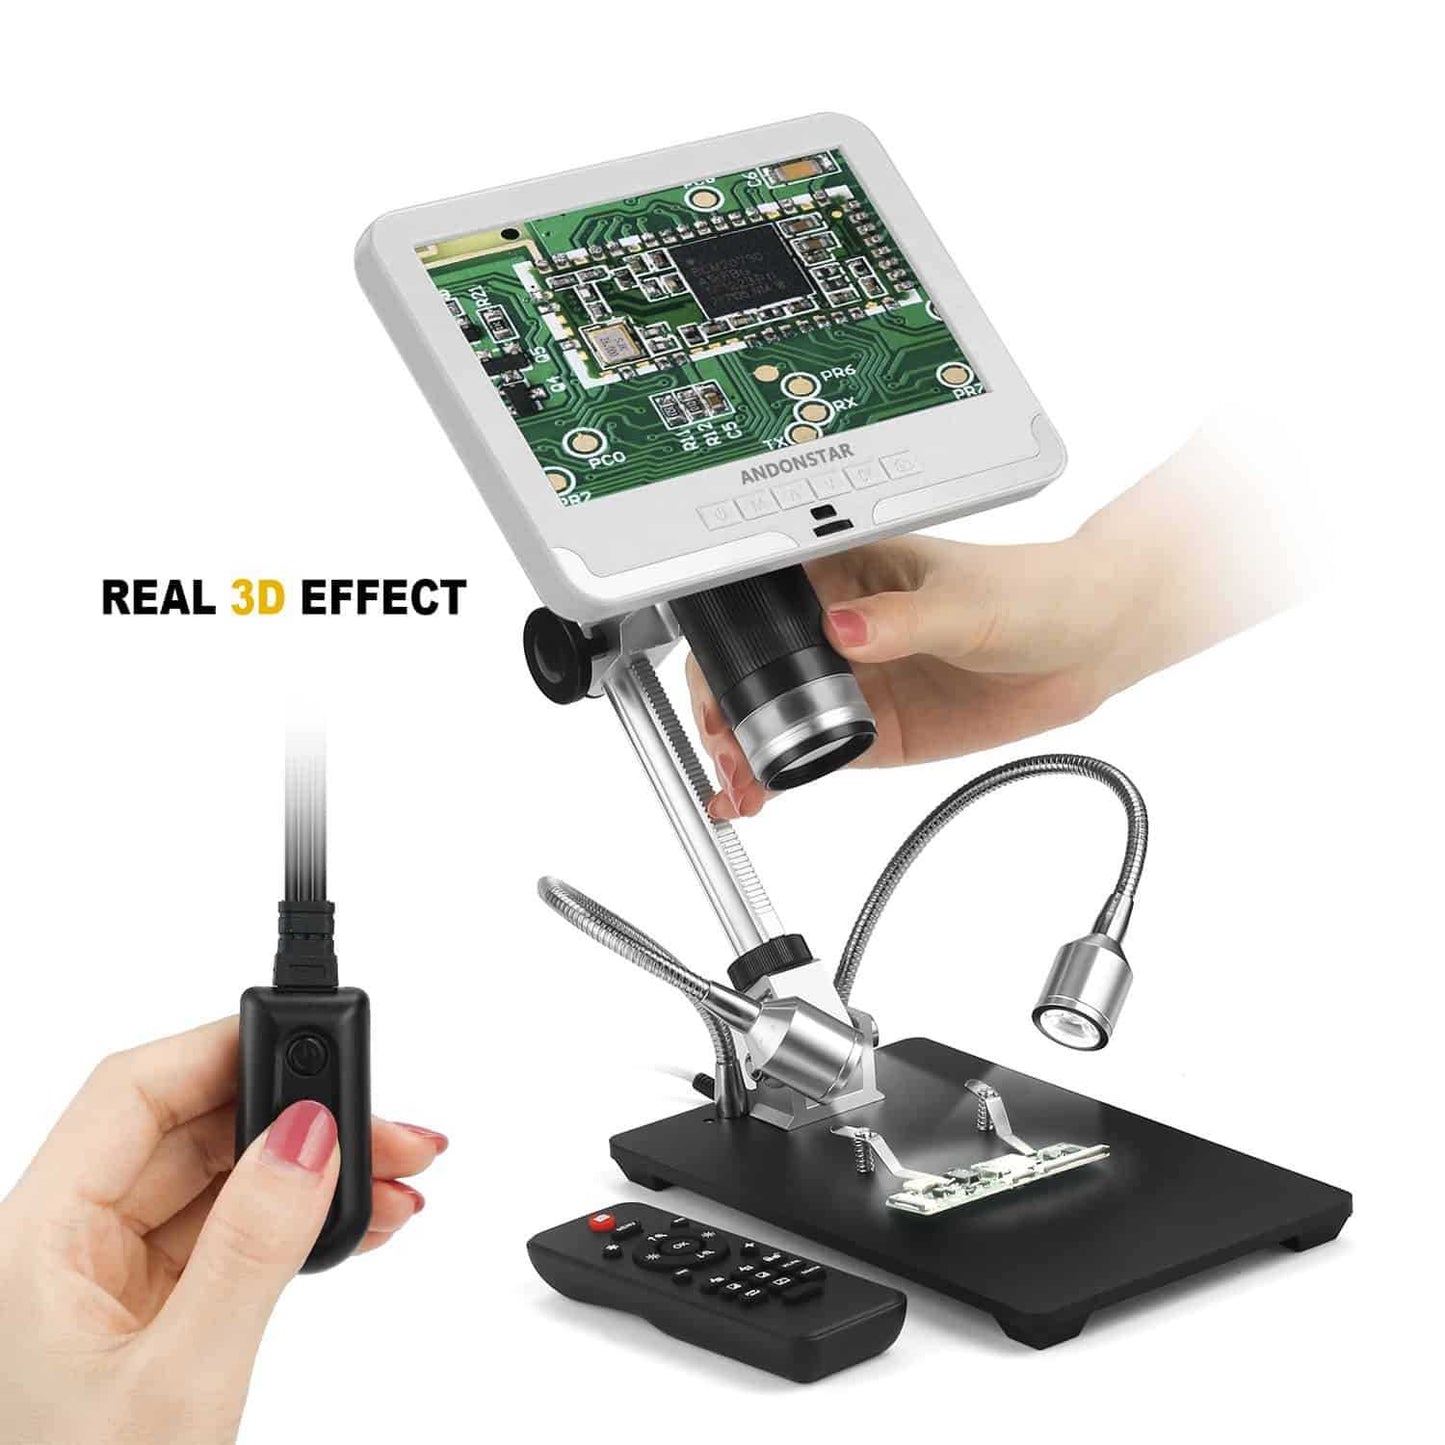 Andonstar Digital Microscope AD206 with UV Fliter PCB Soldering Tool for SMD Soldering and Phone Repair